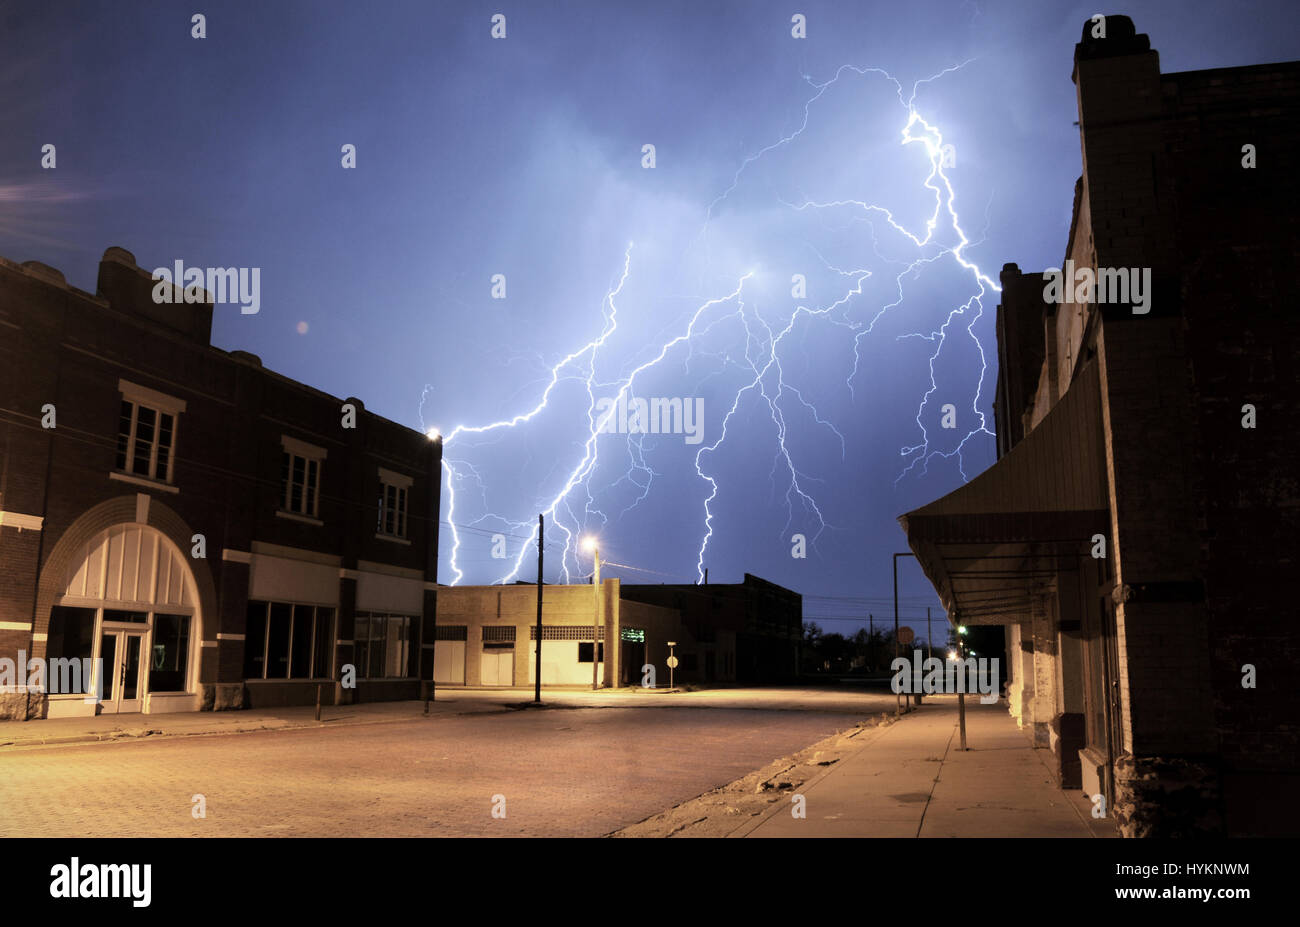 TORNADO ALLEY, USA: Quanah, Texas. THE DEADLIEST weather events have been captured on camera by one lightning quick photographer. Incredible photographs show extreme weather from America’s Tornado Alley, renowned for the frequency of its storms. From terrifying lightning bolts to all-encompassing tornados, these pictures manage to capture to ferocity and atmosphere of these natural phenomena. Stock Photo